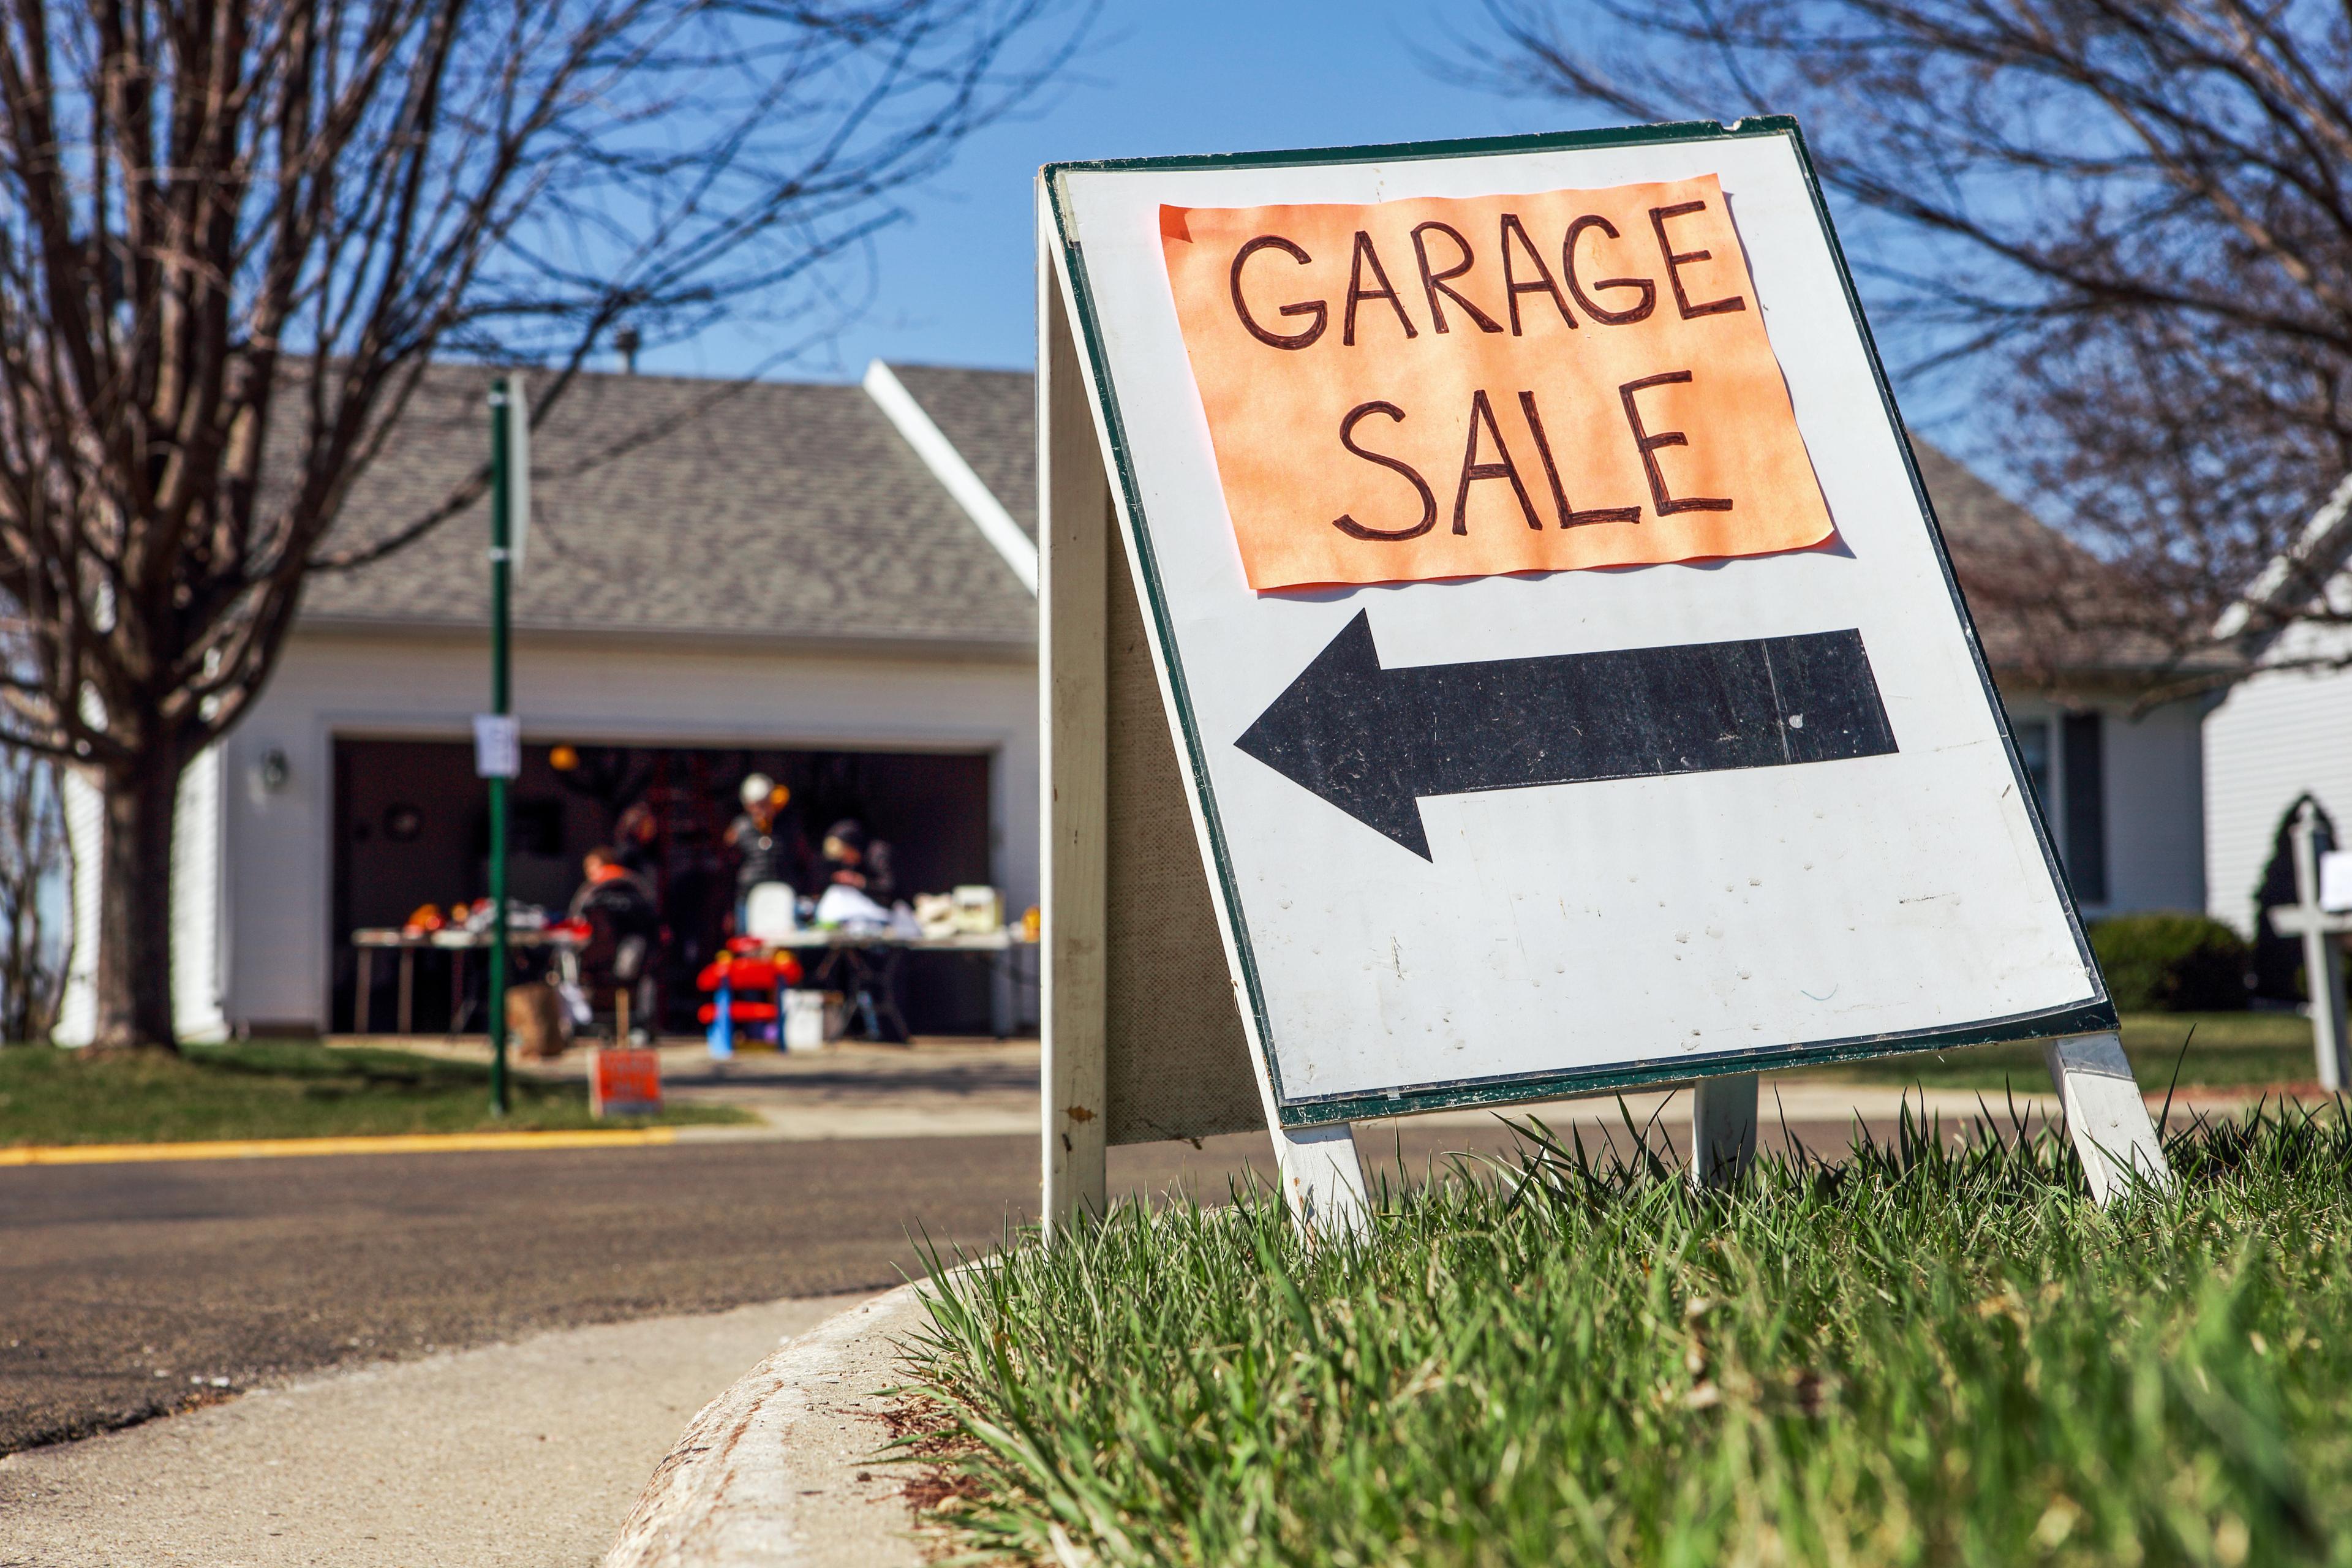 A view of a lawn set up for a garage sale where people are clearing space for new furniture, appliances, electronics and more household items.